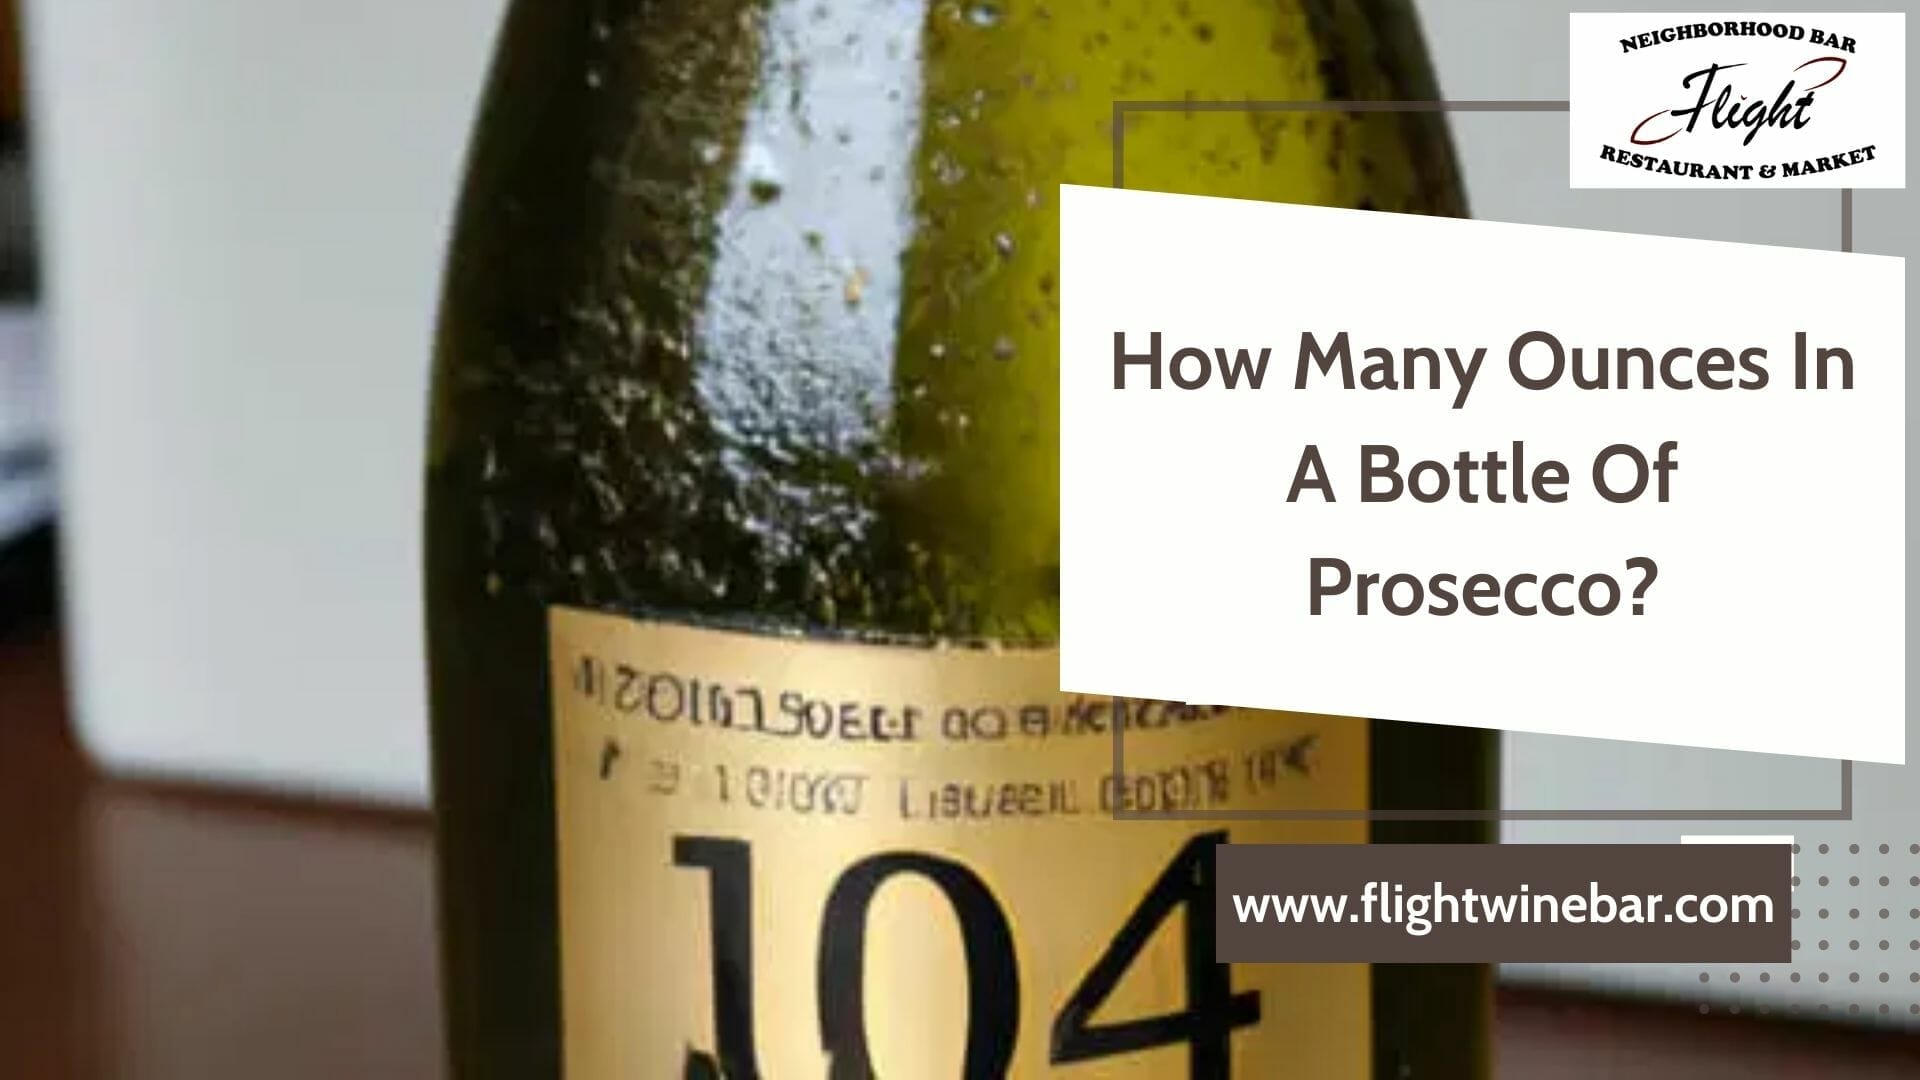 How Many Ounces In A Bottle Of Prosecco